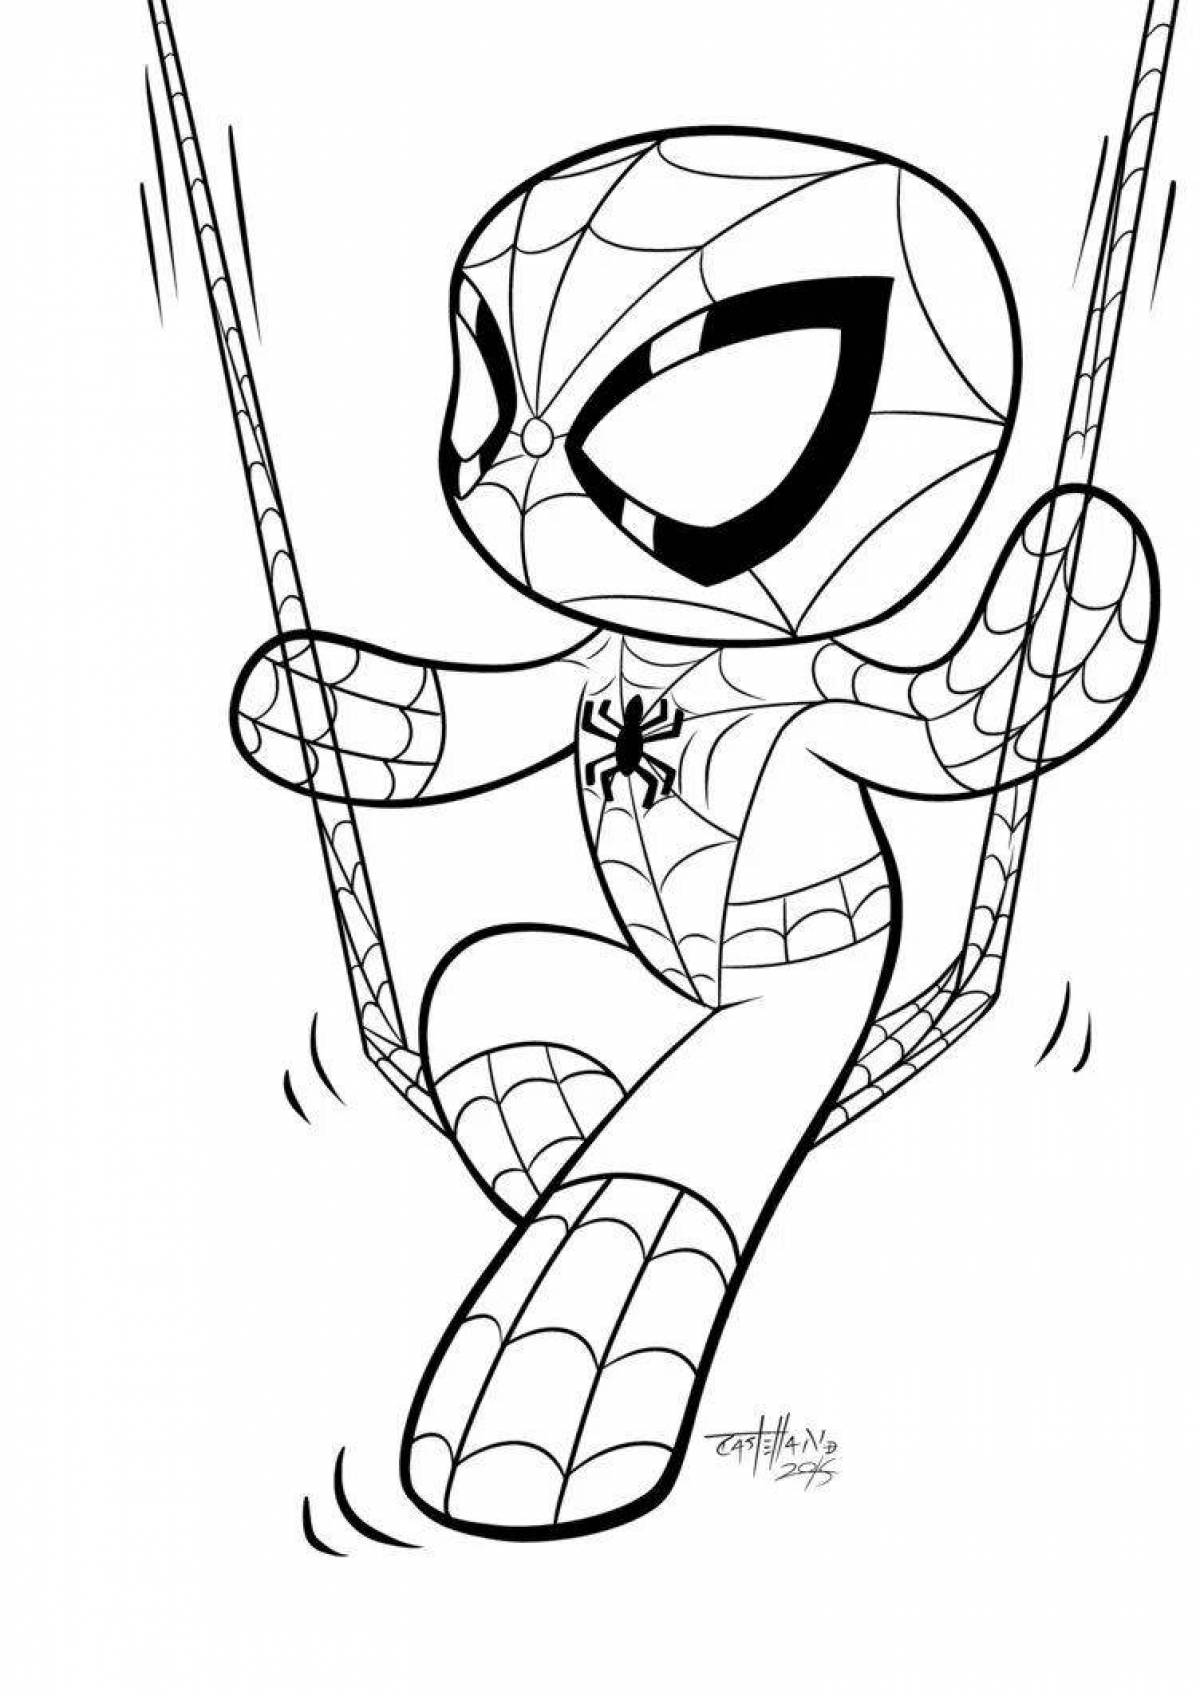 Playful spider cartoon coloring page